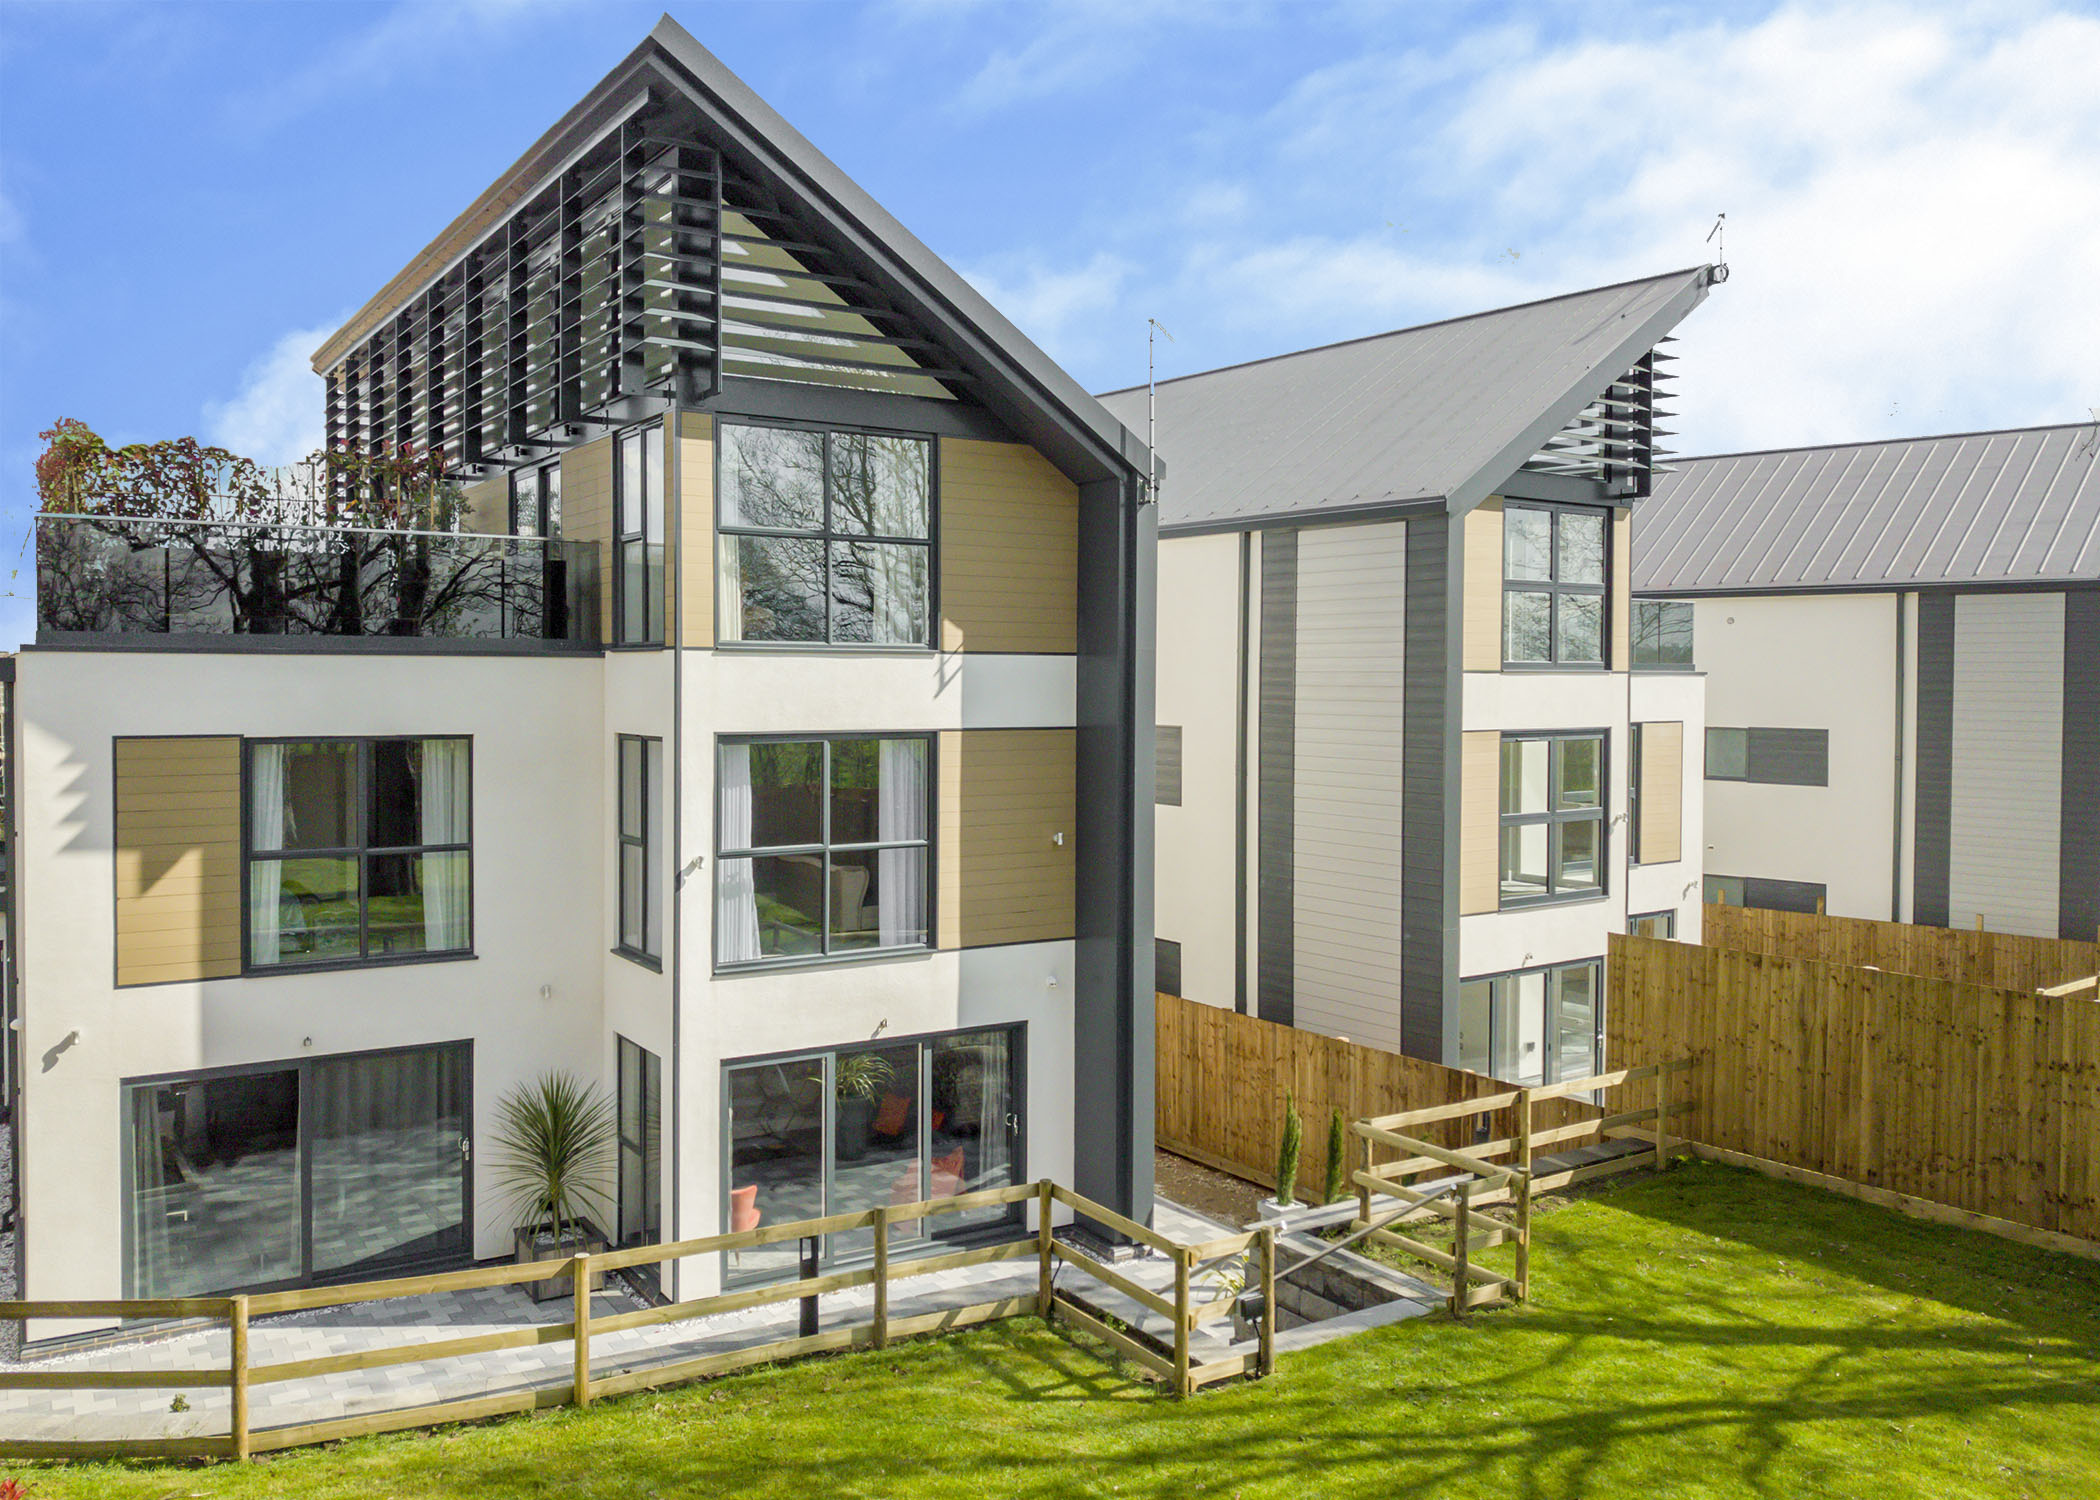 Vicaima bring an added dimension to William May development @vicaimadoors